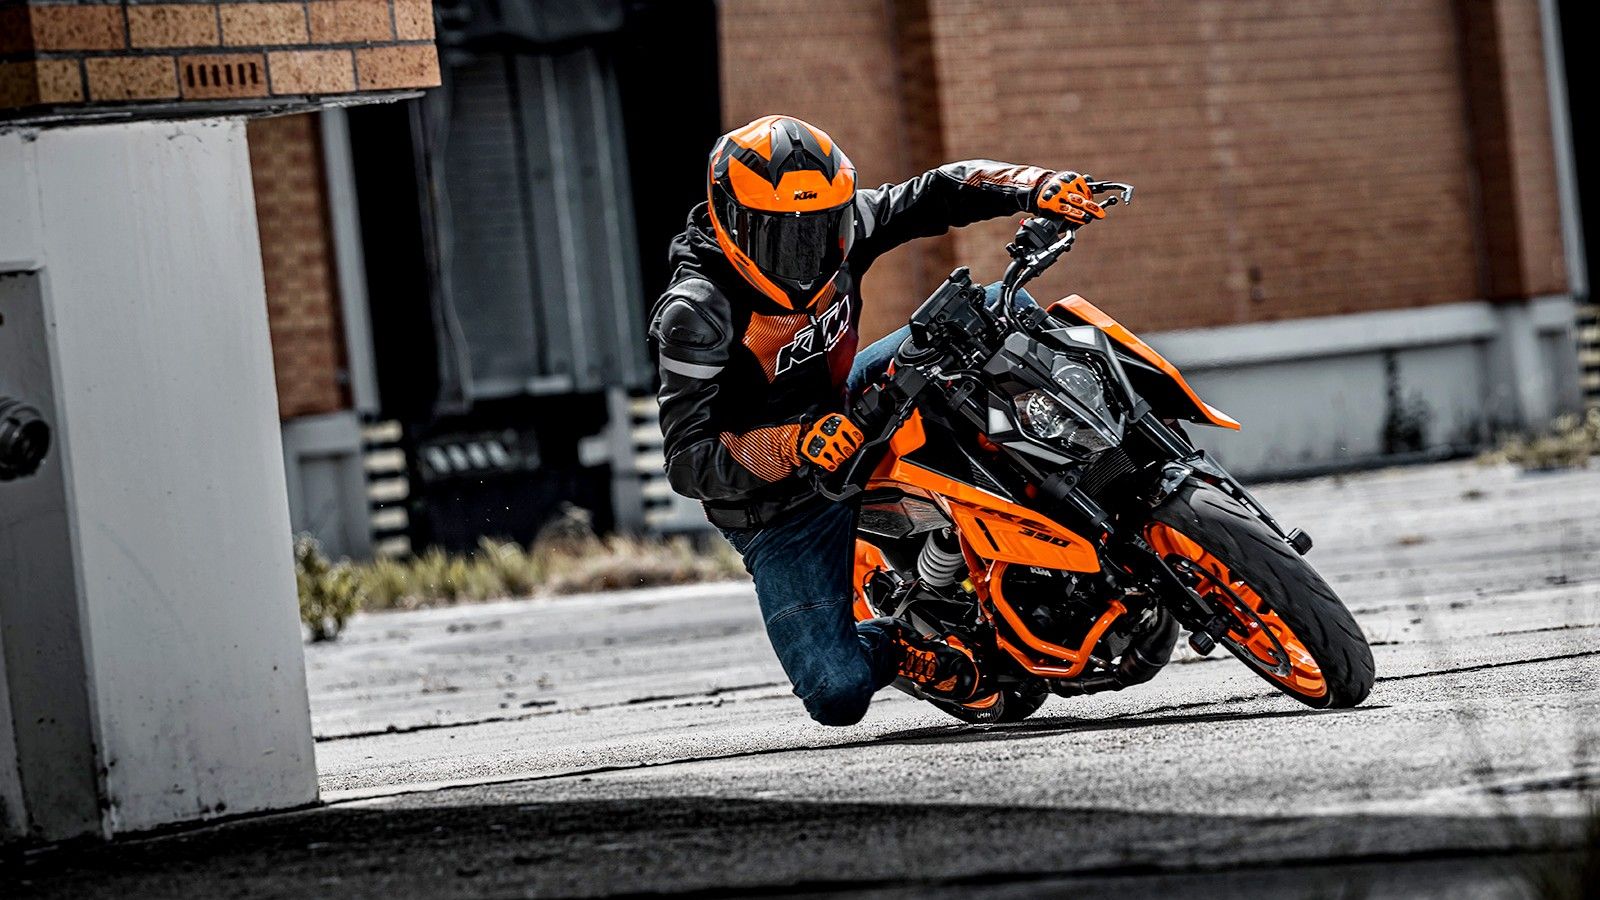 Top 10 Motorcycles For Newbies A Beginner’s Guide